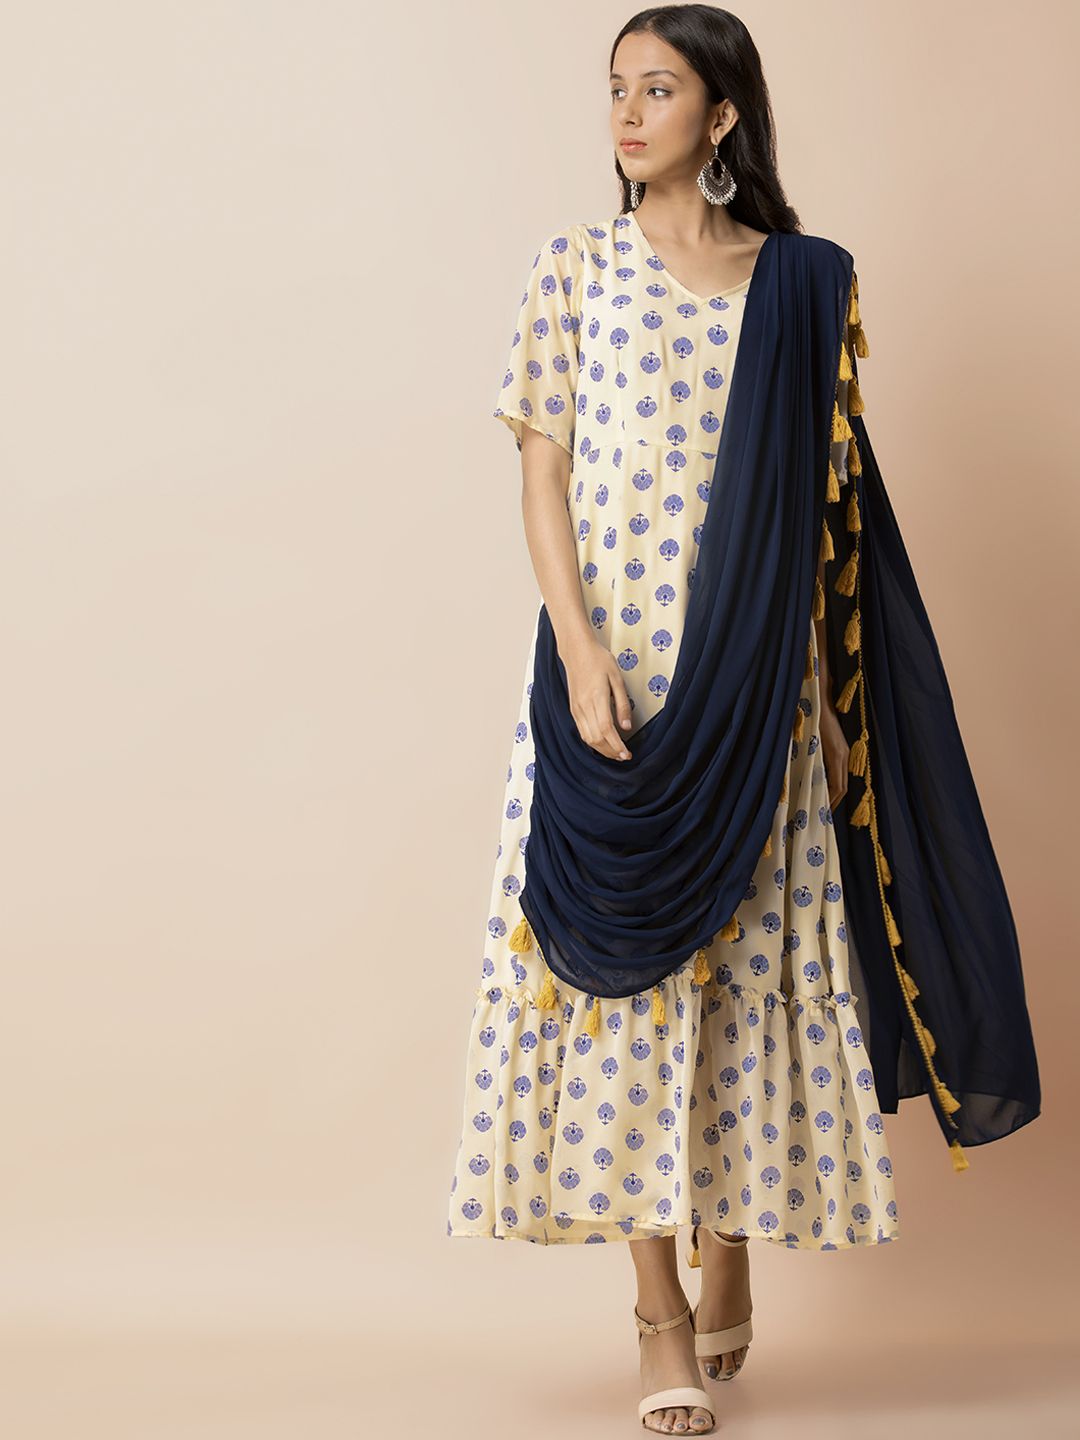 INDYA Women White & Navy Blue Printed Maxi Dress With Attached Dupatta Price in India